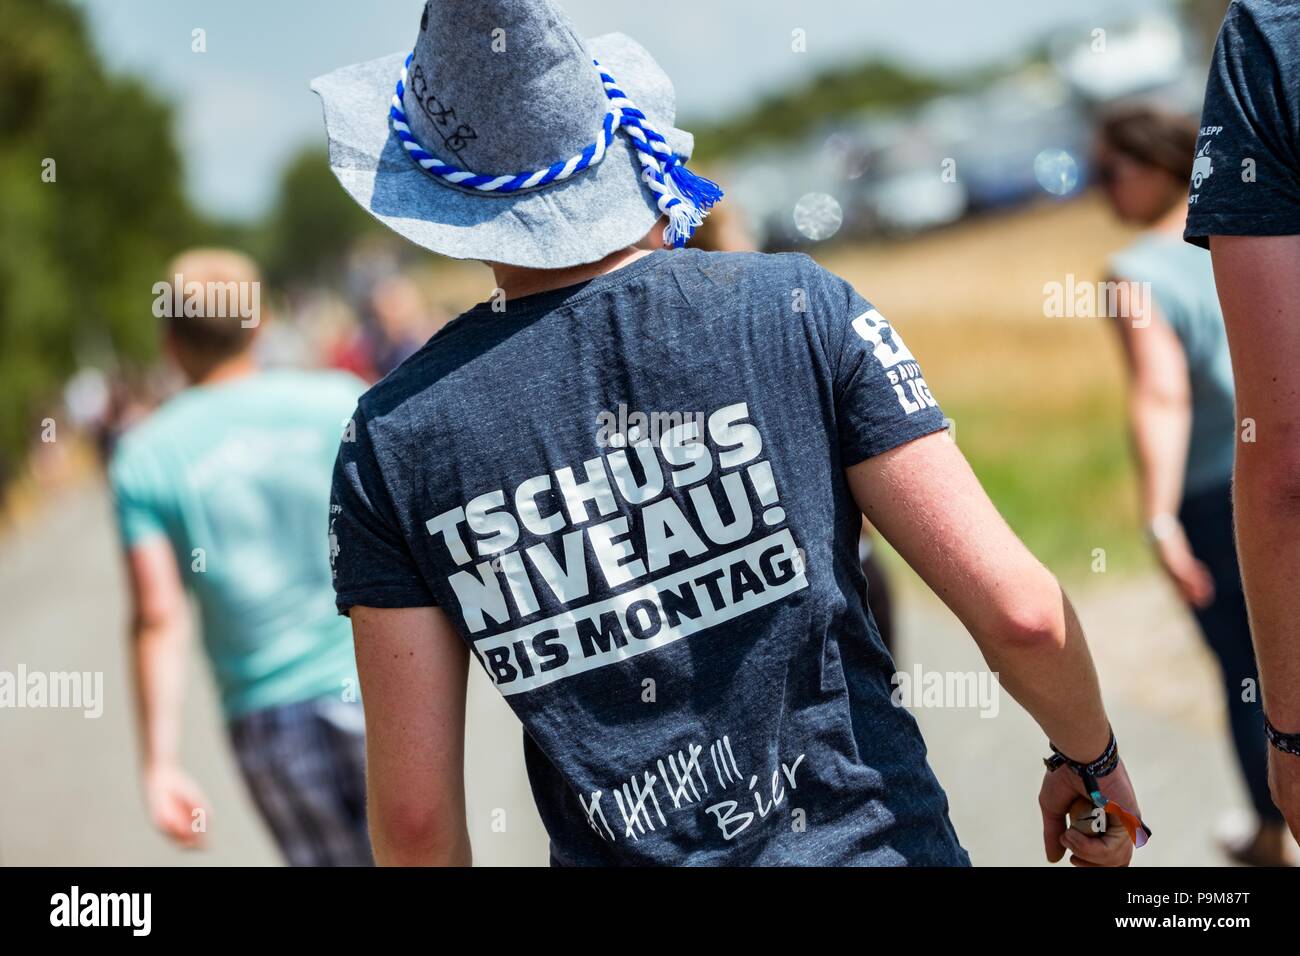 Cuxhaven, Germany. 19th July, 2018. A visitor at the Deichbrand festival wearing a t-shirt with the words 'Tschüss Niveau! Bis Montag' (lit. bye Niveau! See you Monday). 50,000 visitors are expected to attend in the next four days and around 100 bands and shows are also expected. Credit: Mohssen Assanimoghaddam/dpa/Alamy Live News Stock Photo